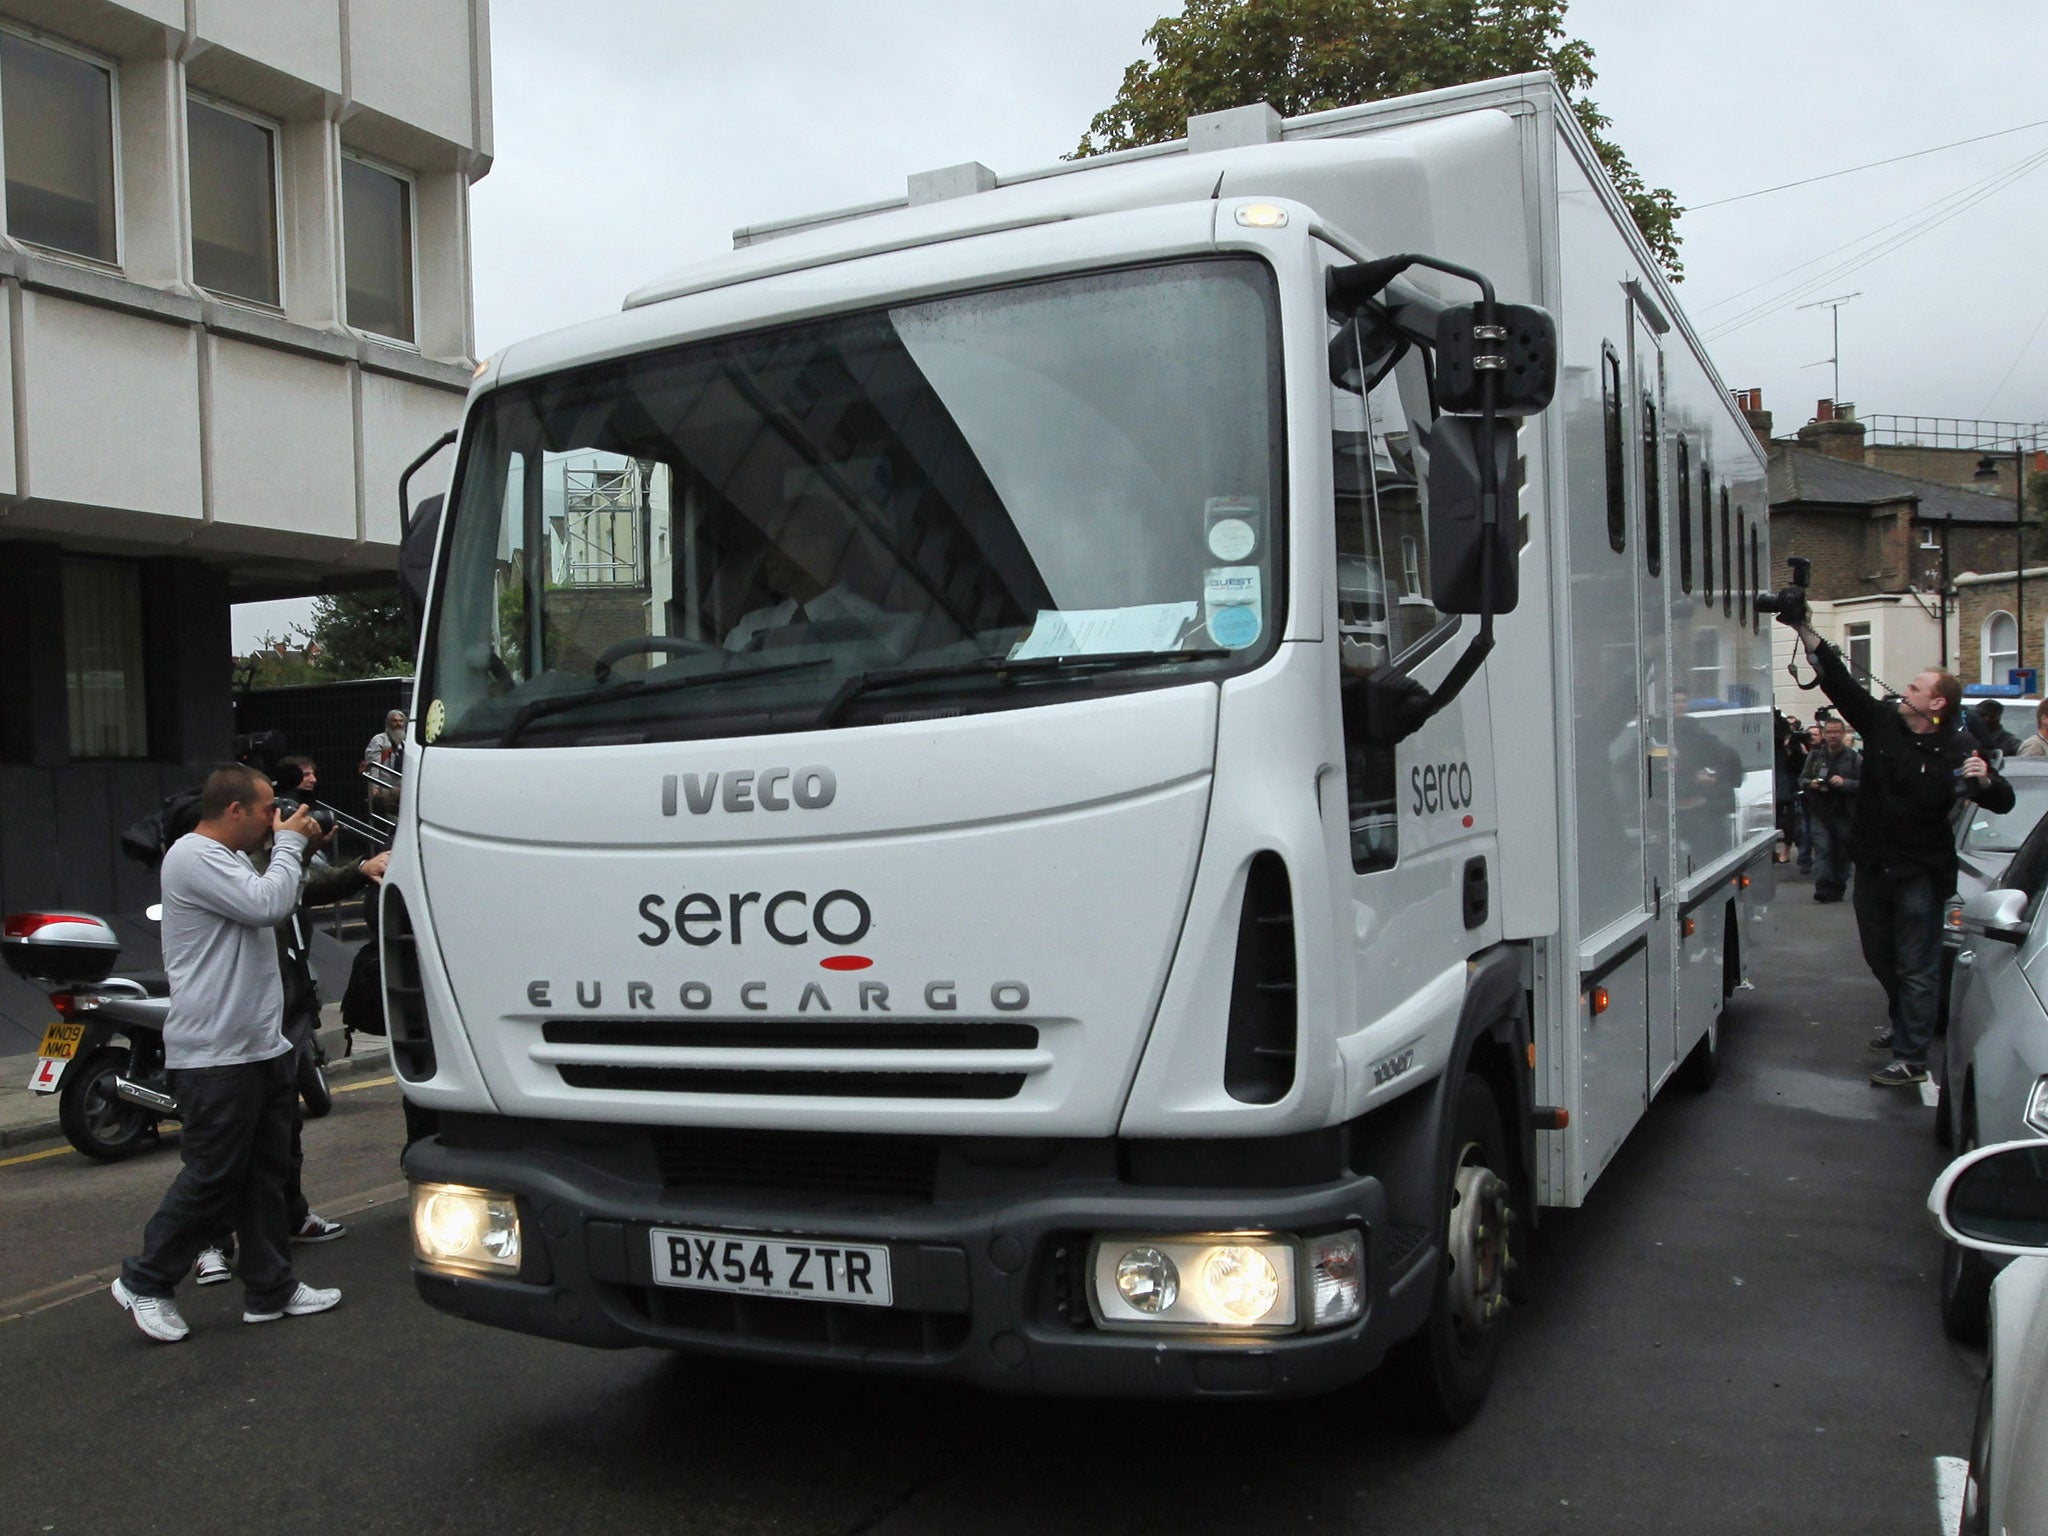 Jeremy Stafford quits as UK chief of scandal-hit security group Serco